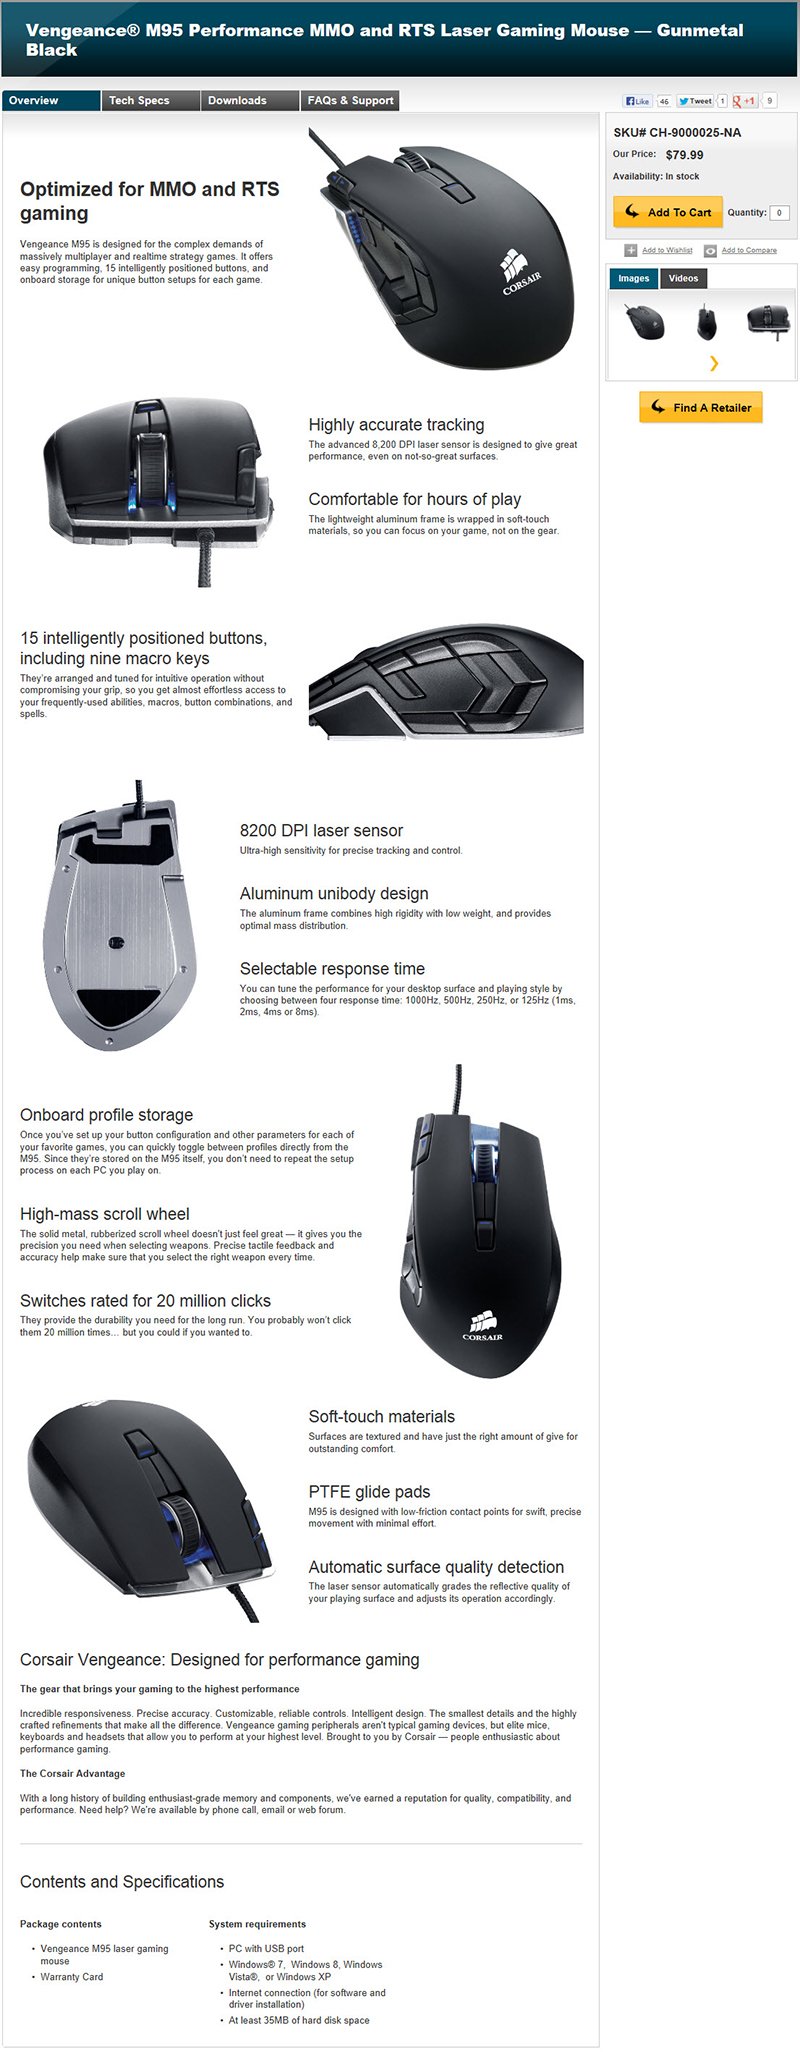 8 3 2013 12 14 41 am Corsair Vengeance M95 Performance MMO and RTS Laser Gaming Mouse Review